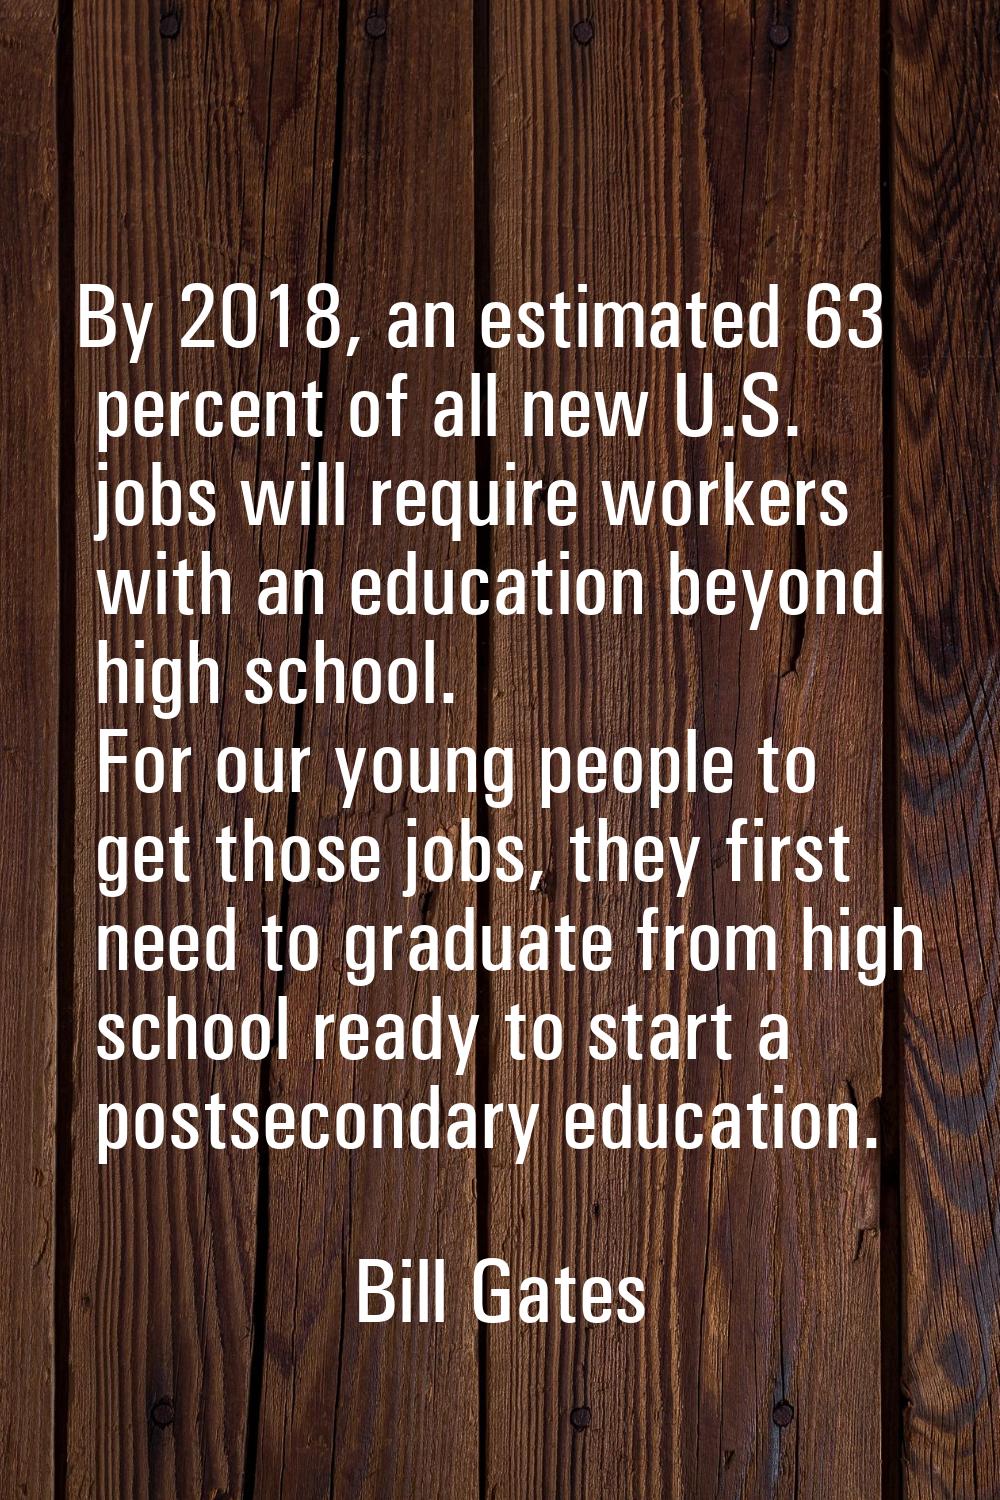 By 2018, an estimated 63 percent of all new U.S. jobs will require workers with an education beyond